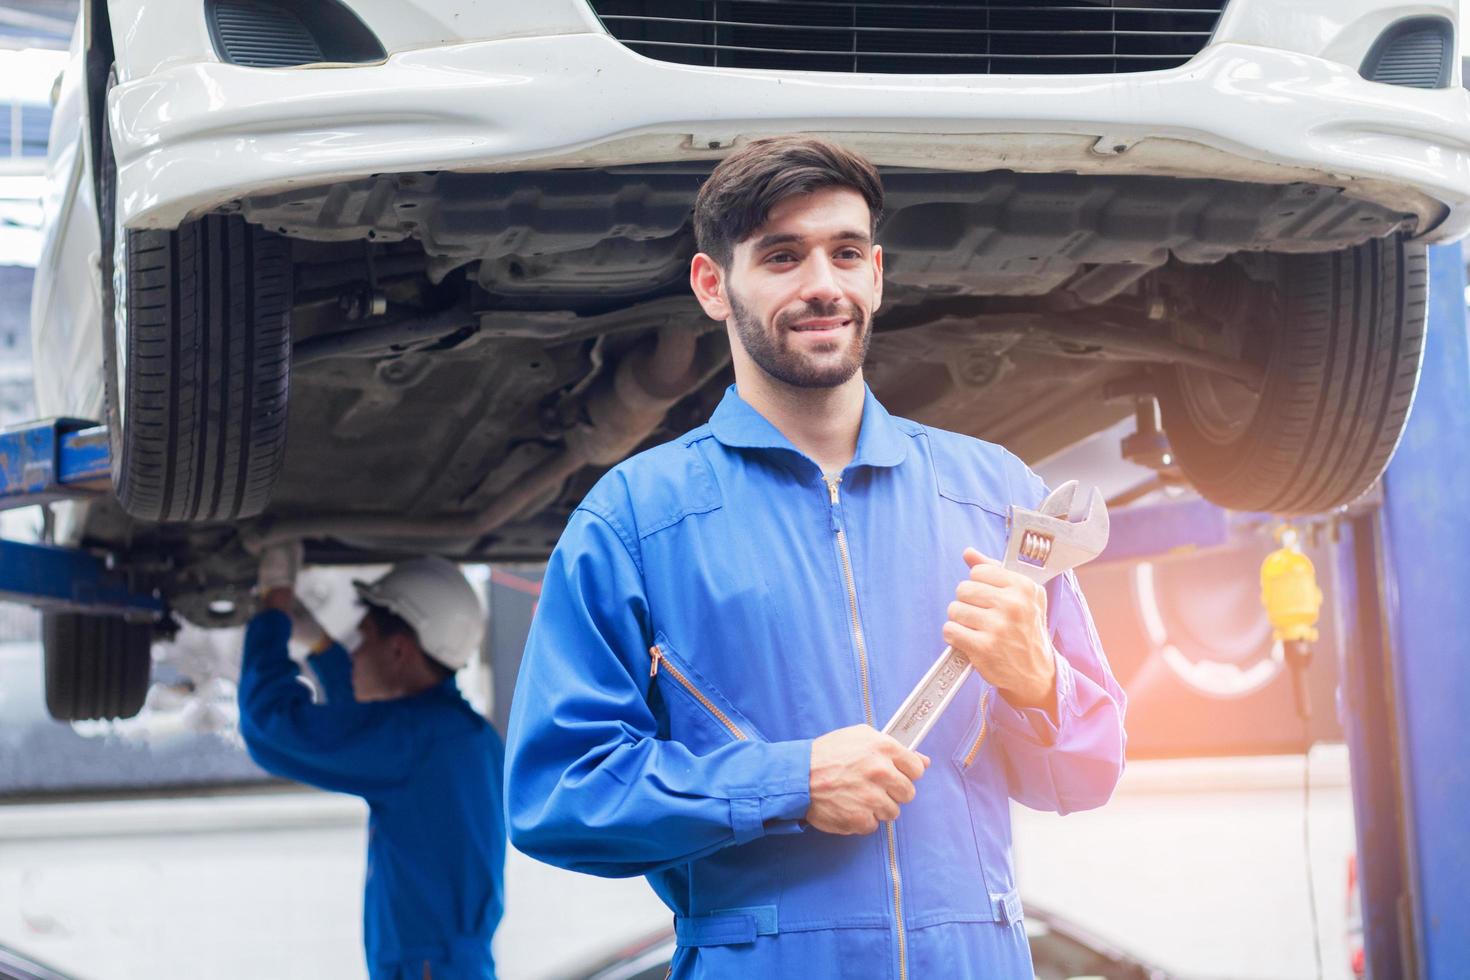 Technicians at car service center stand with tools and ready to provide professional services photo